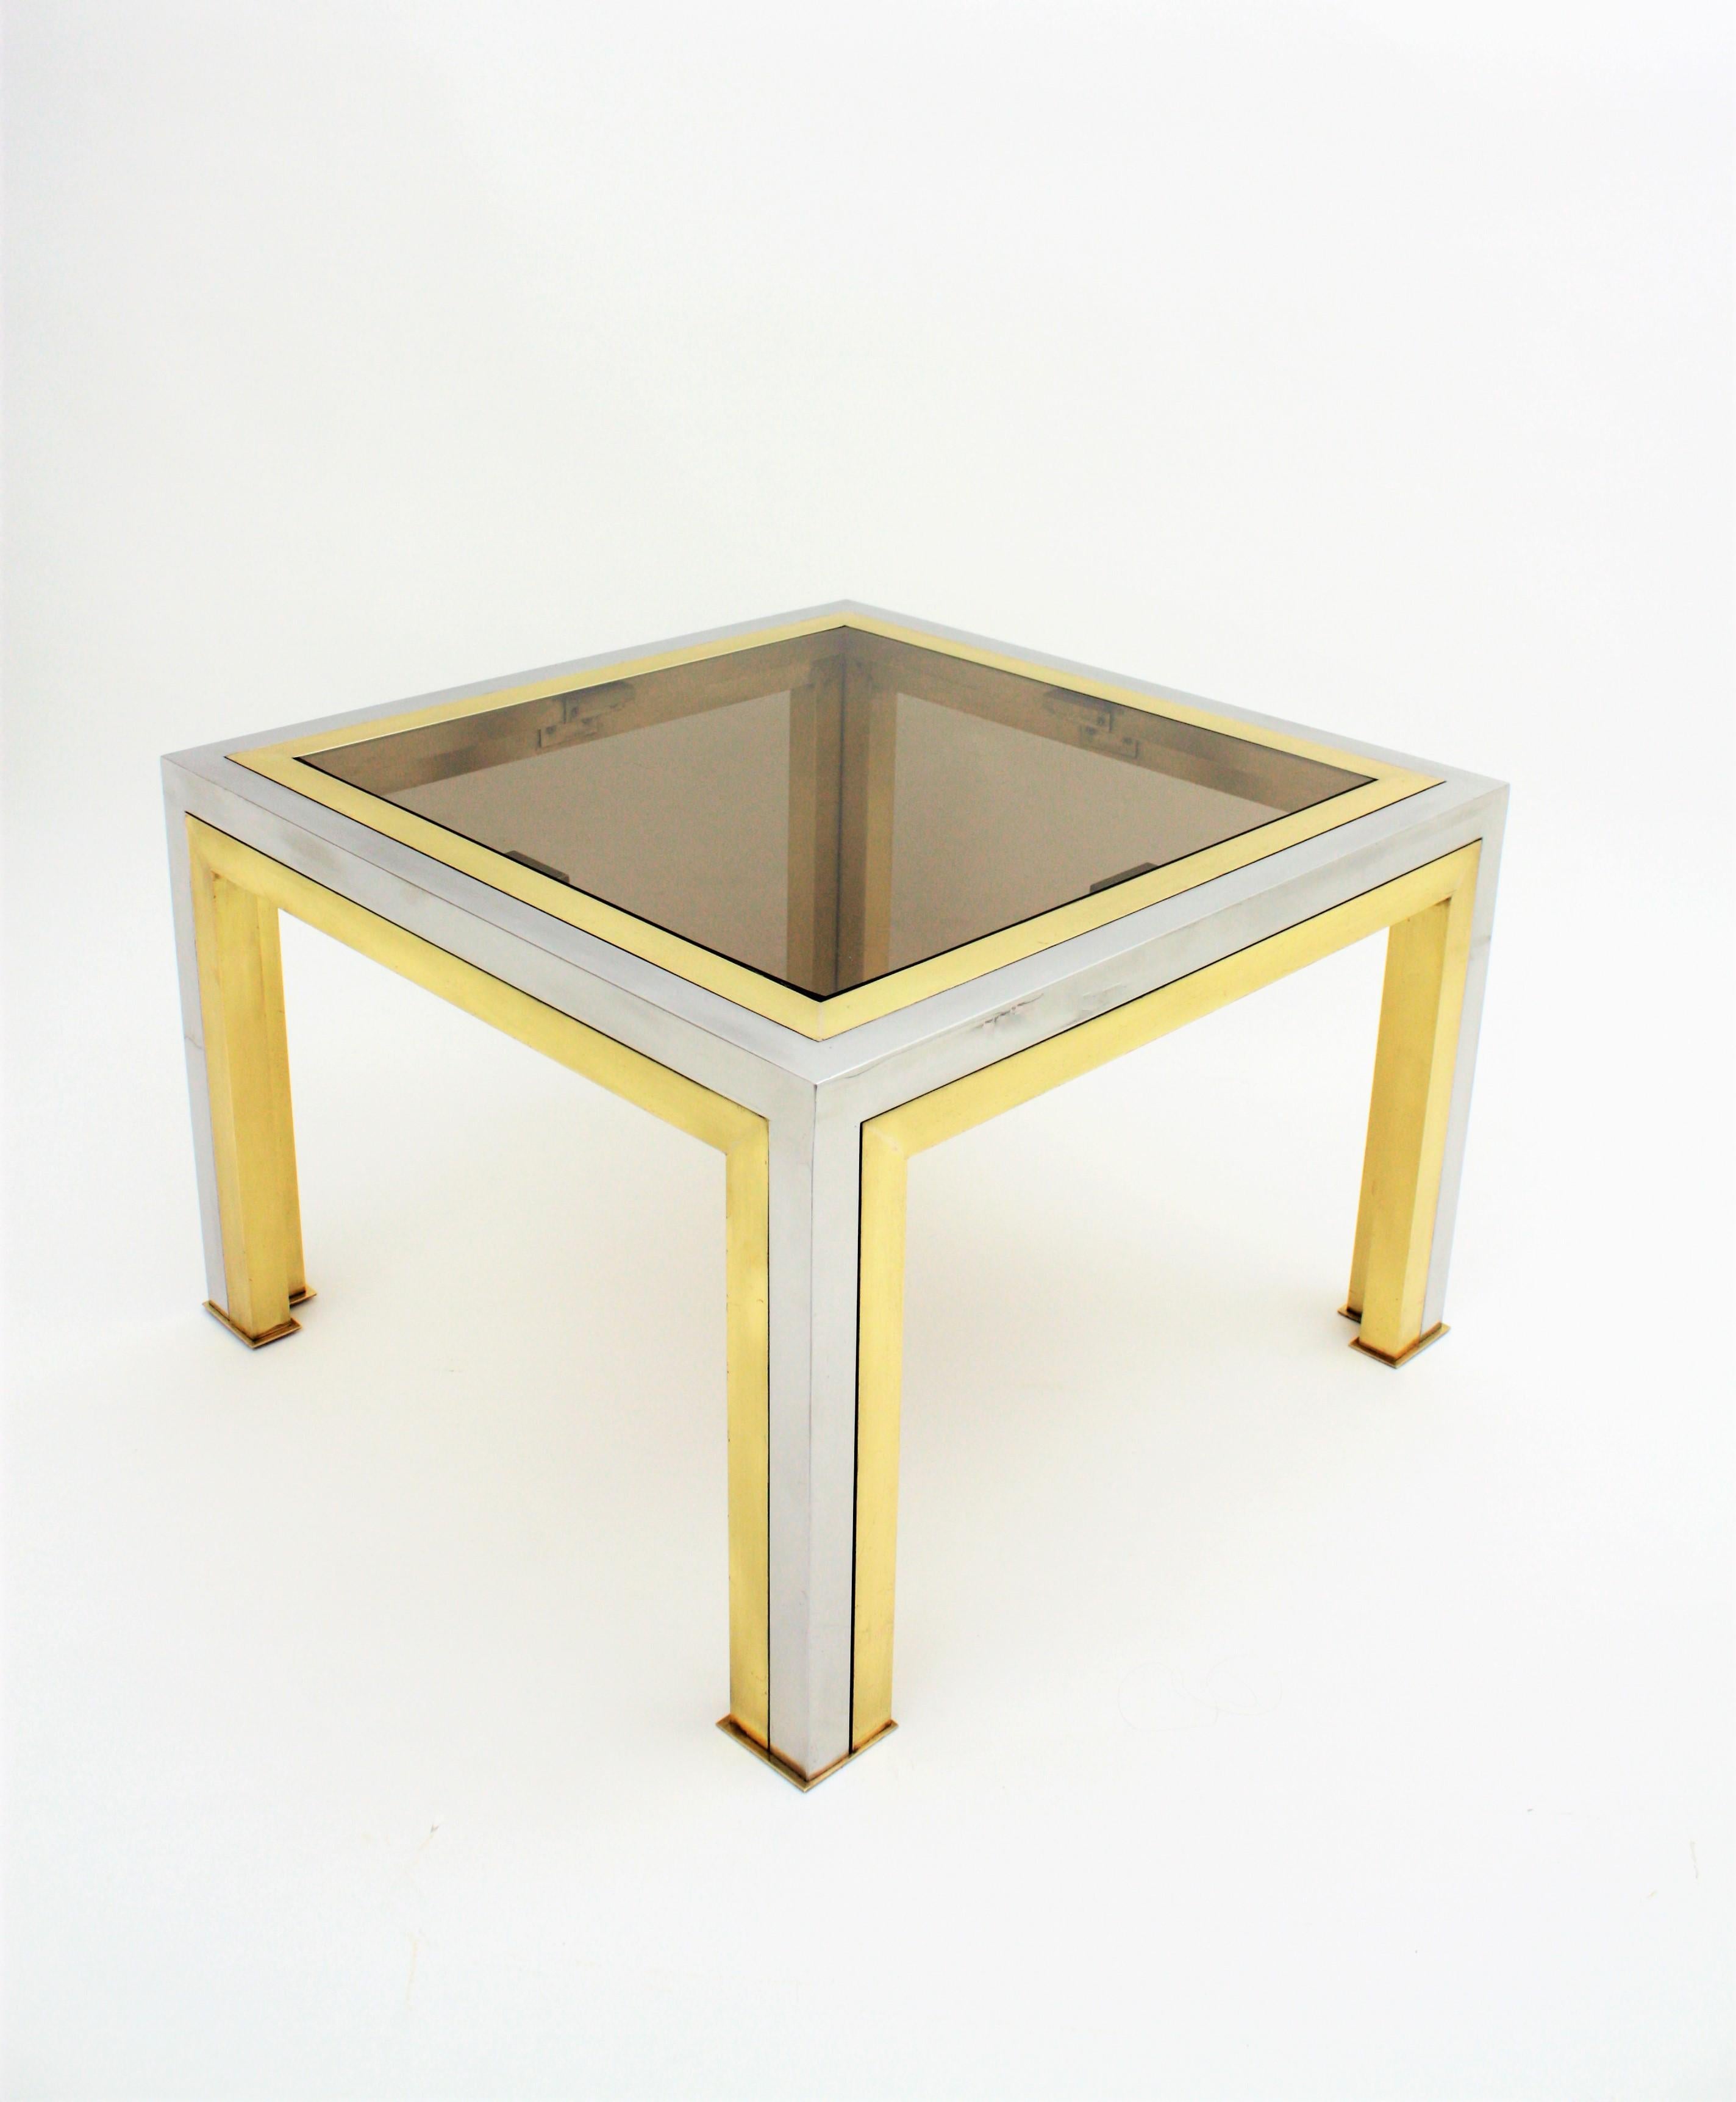 Romeo Rega Coffee Table in Brass, Chromed Steel and Glass 5